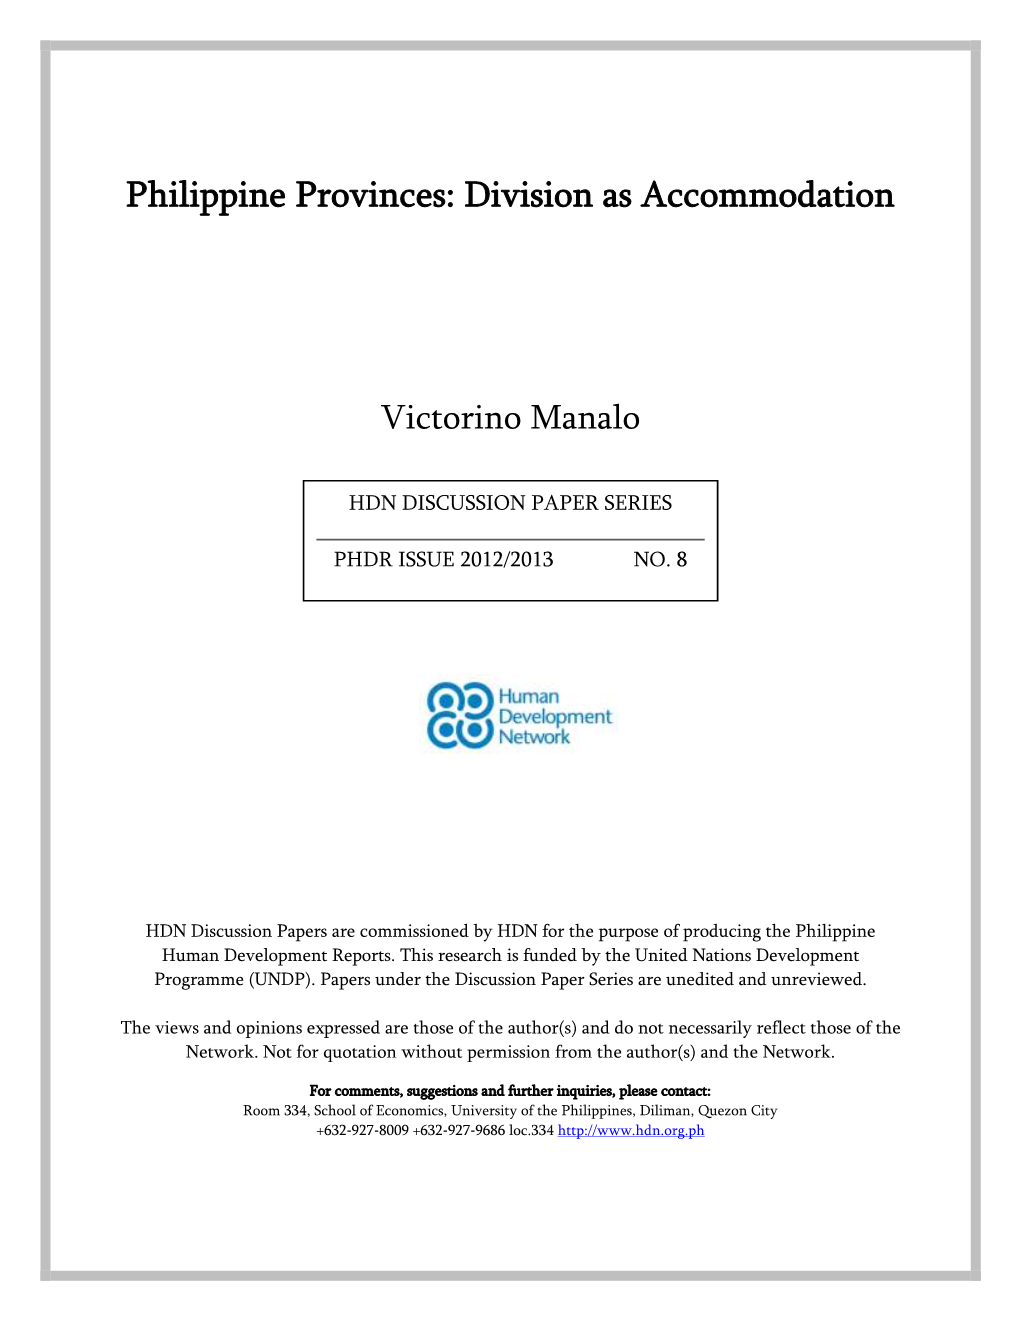 Philippine Provinces: Division As Accommodation